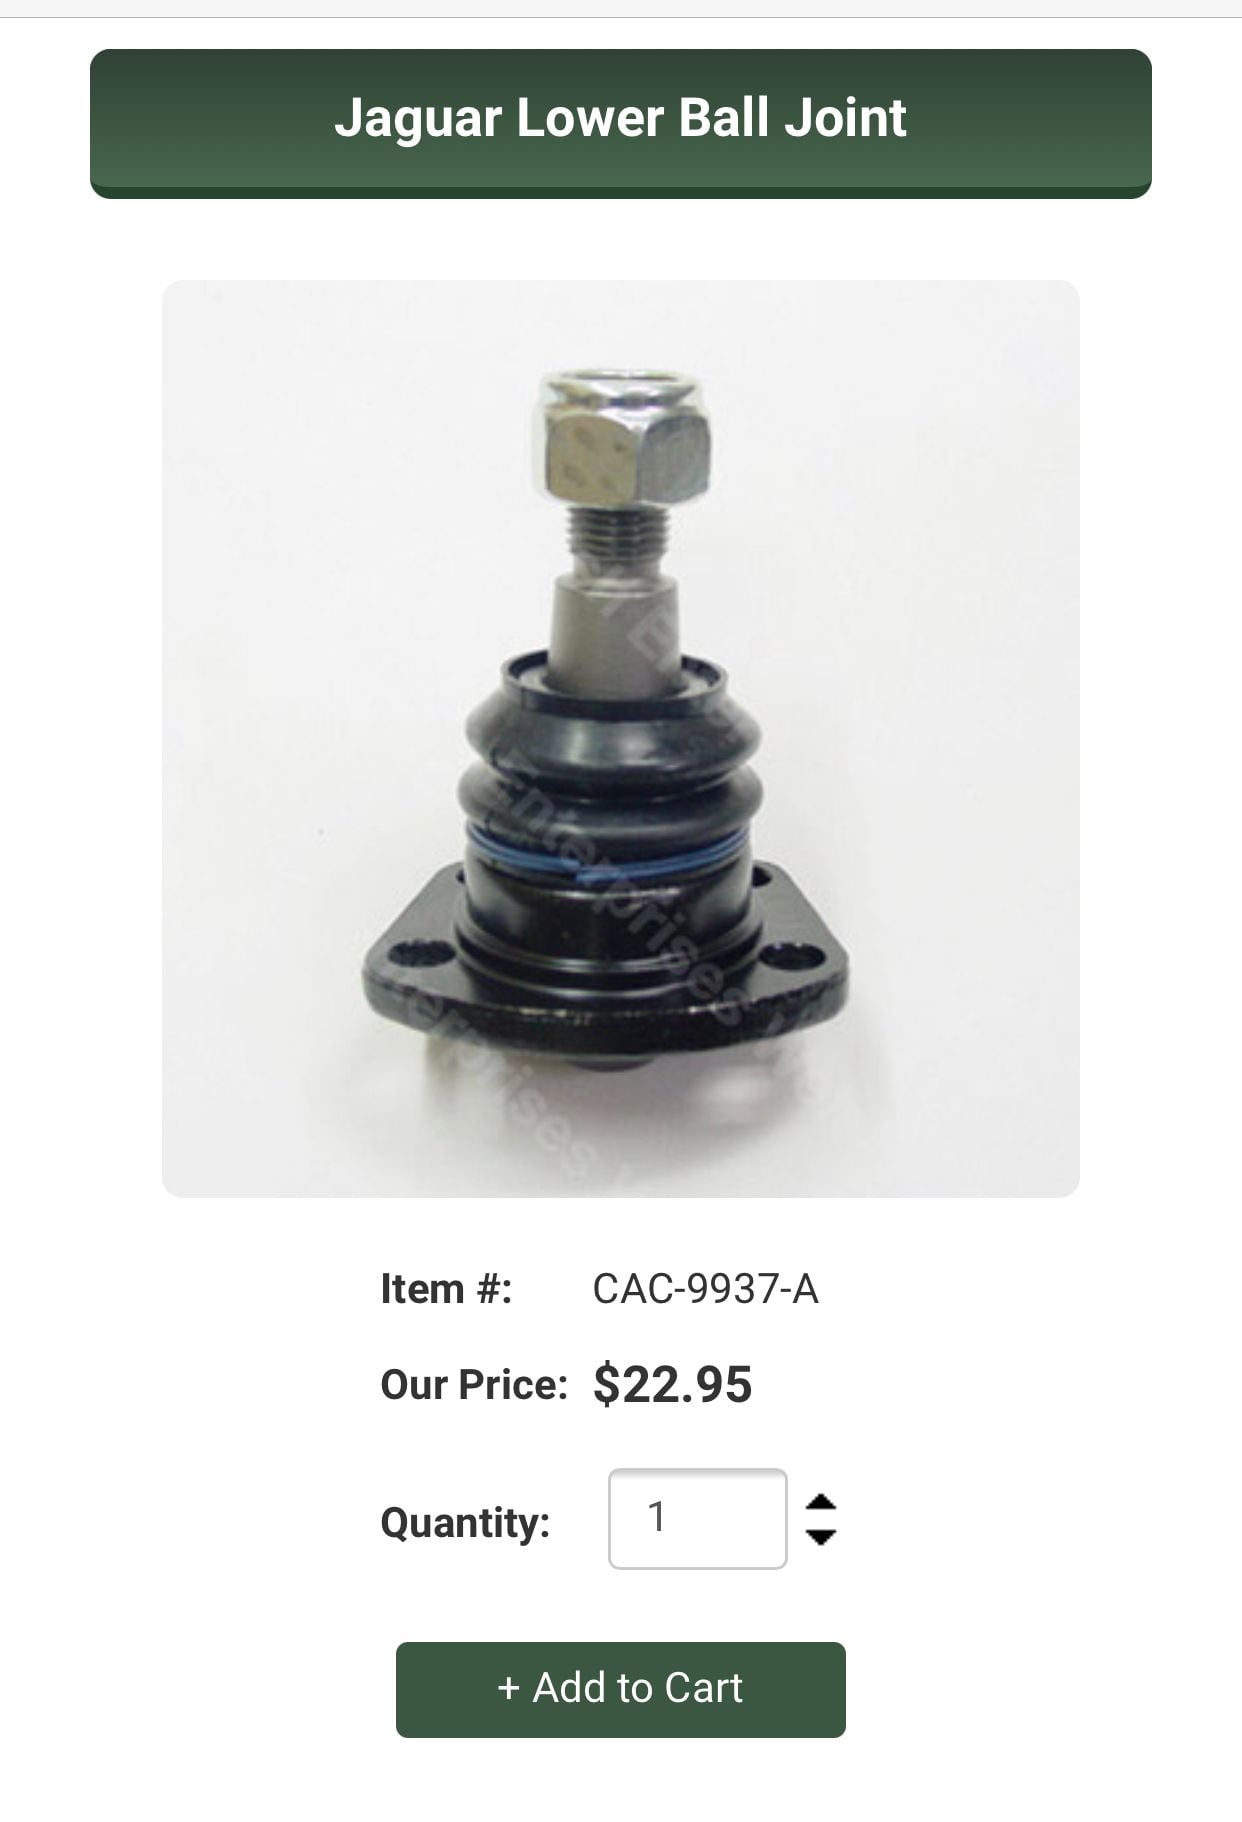 Steering/Suspension - Jaguar xj6 ball joints and bushings ( New ) - New - 1977 to 1987 Jaguar XJ - Canonsburg, PA 15317, United States